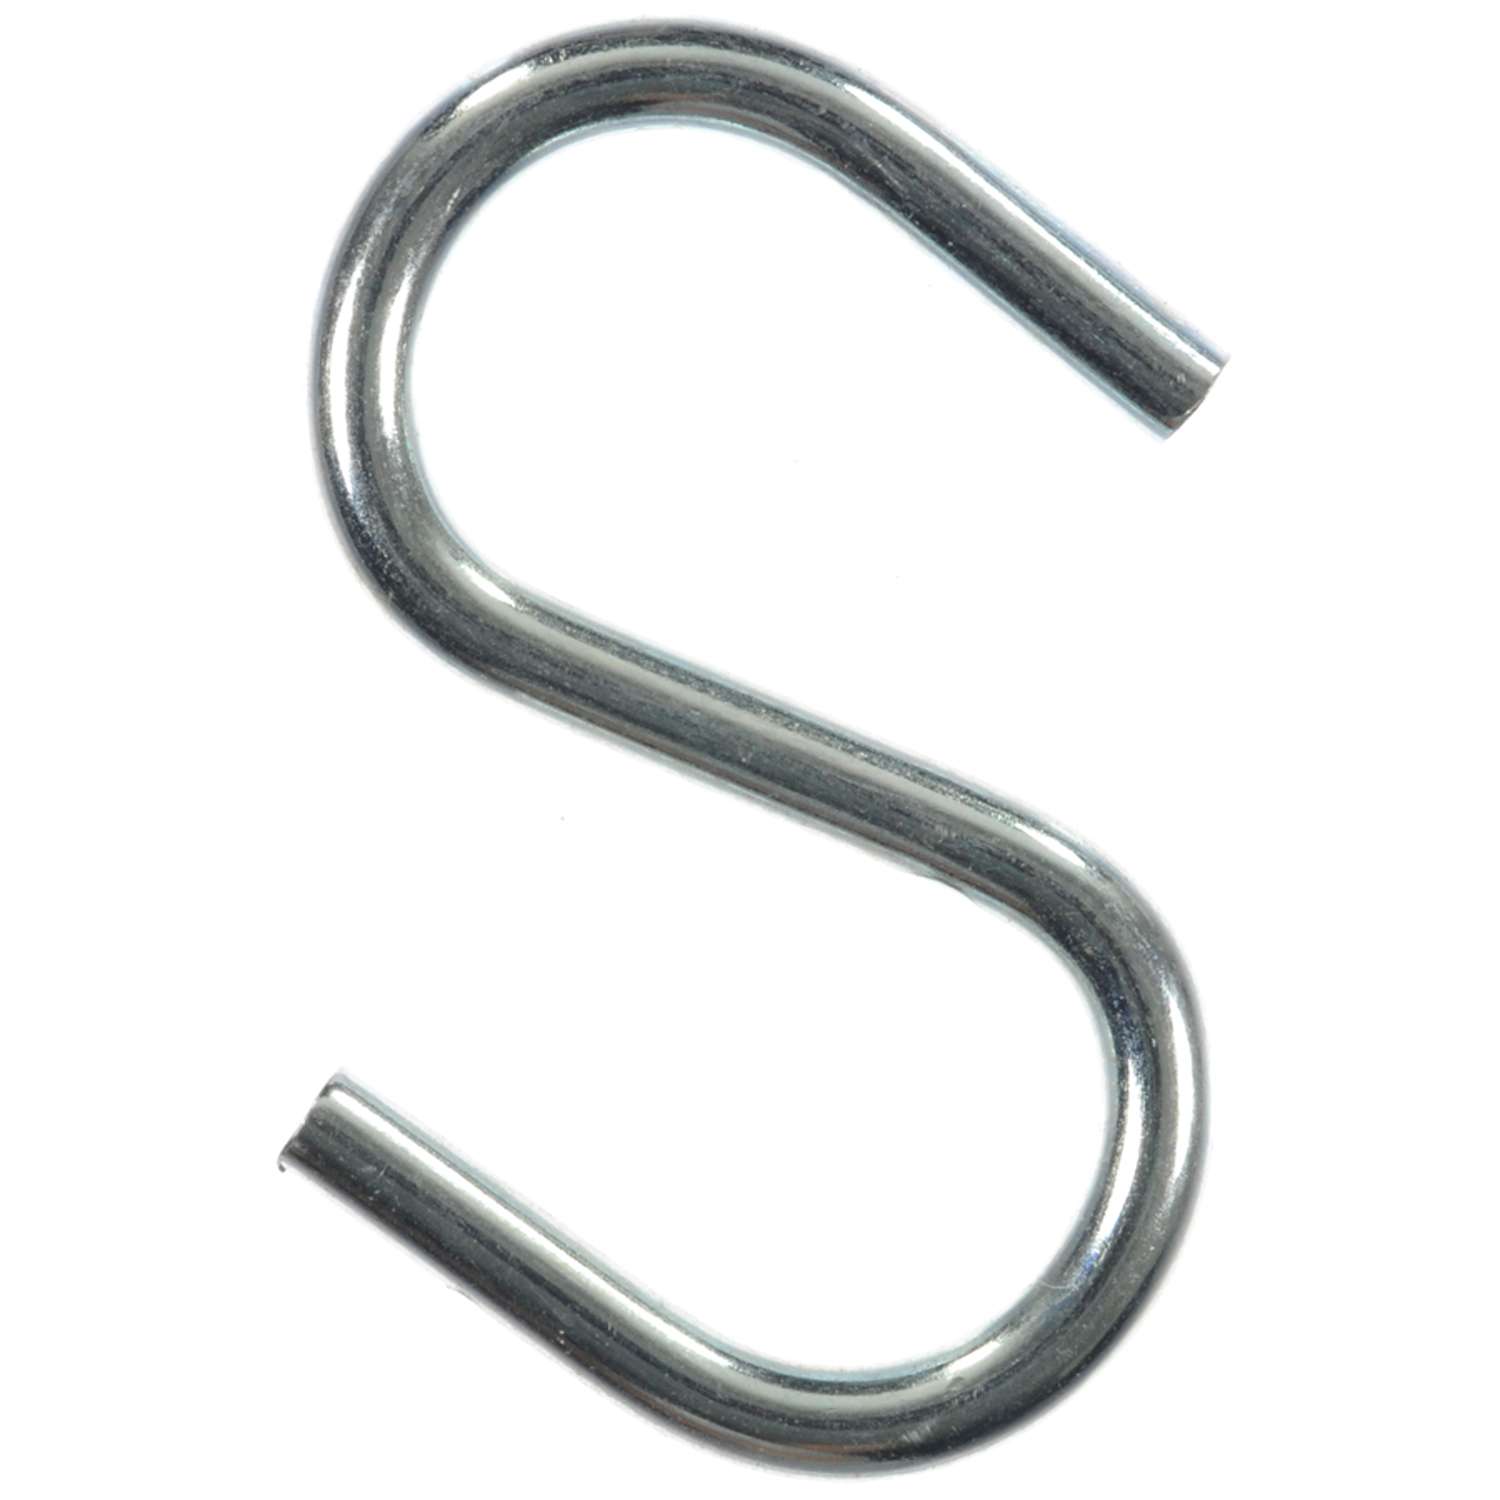 Zinc plated S Hooks XL Rust proof Pointed end 150mm Pack of 10. Steel 